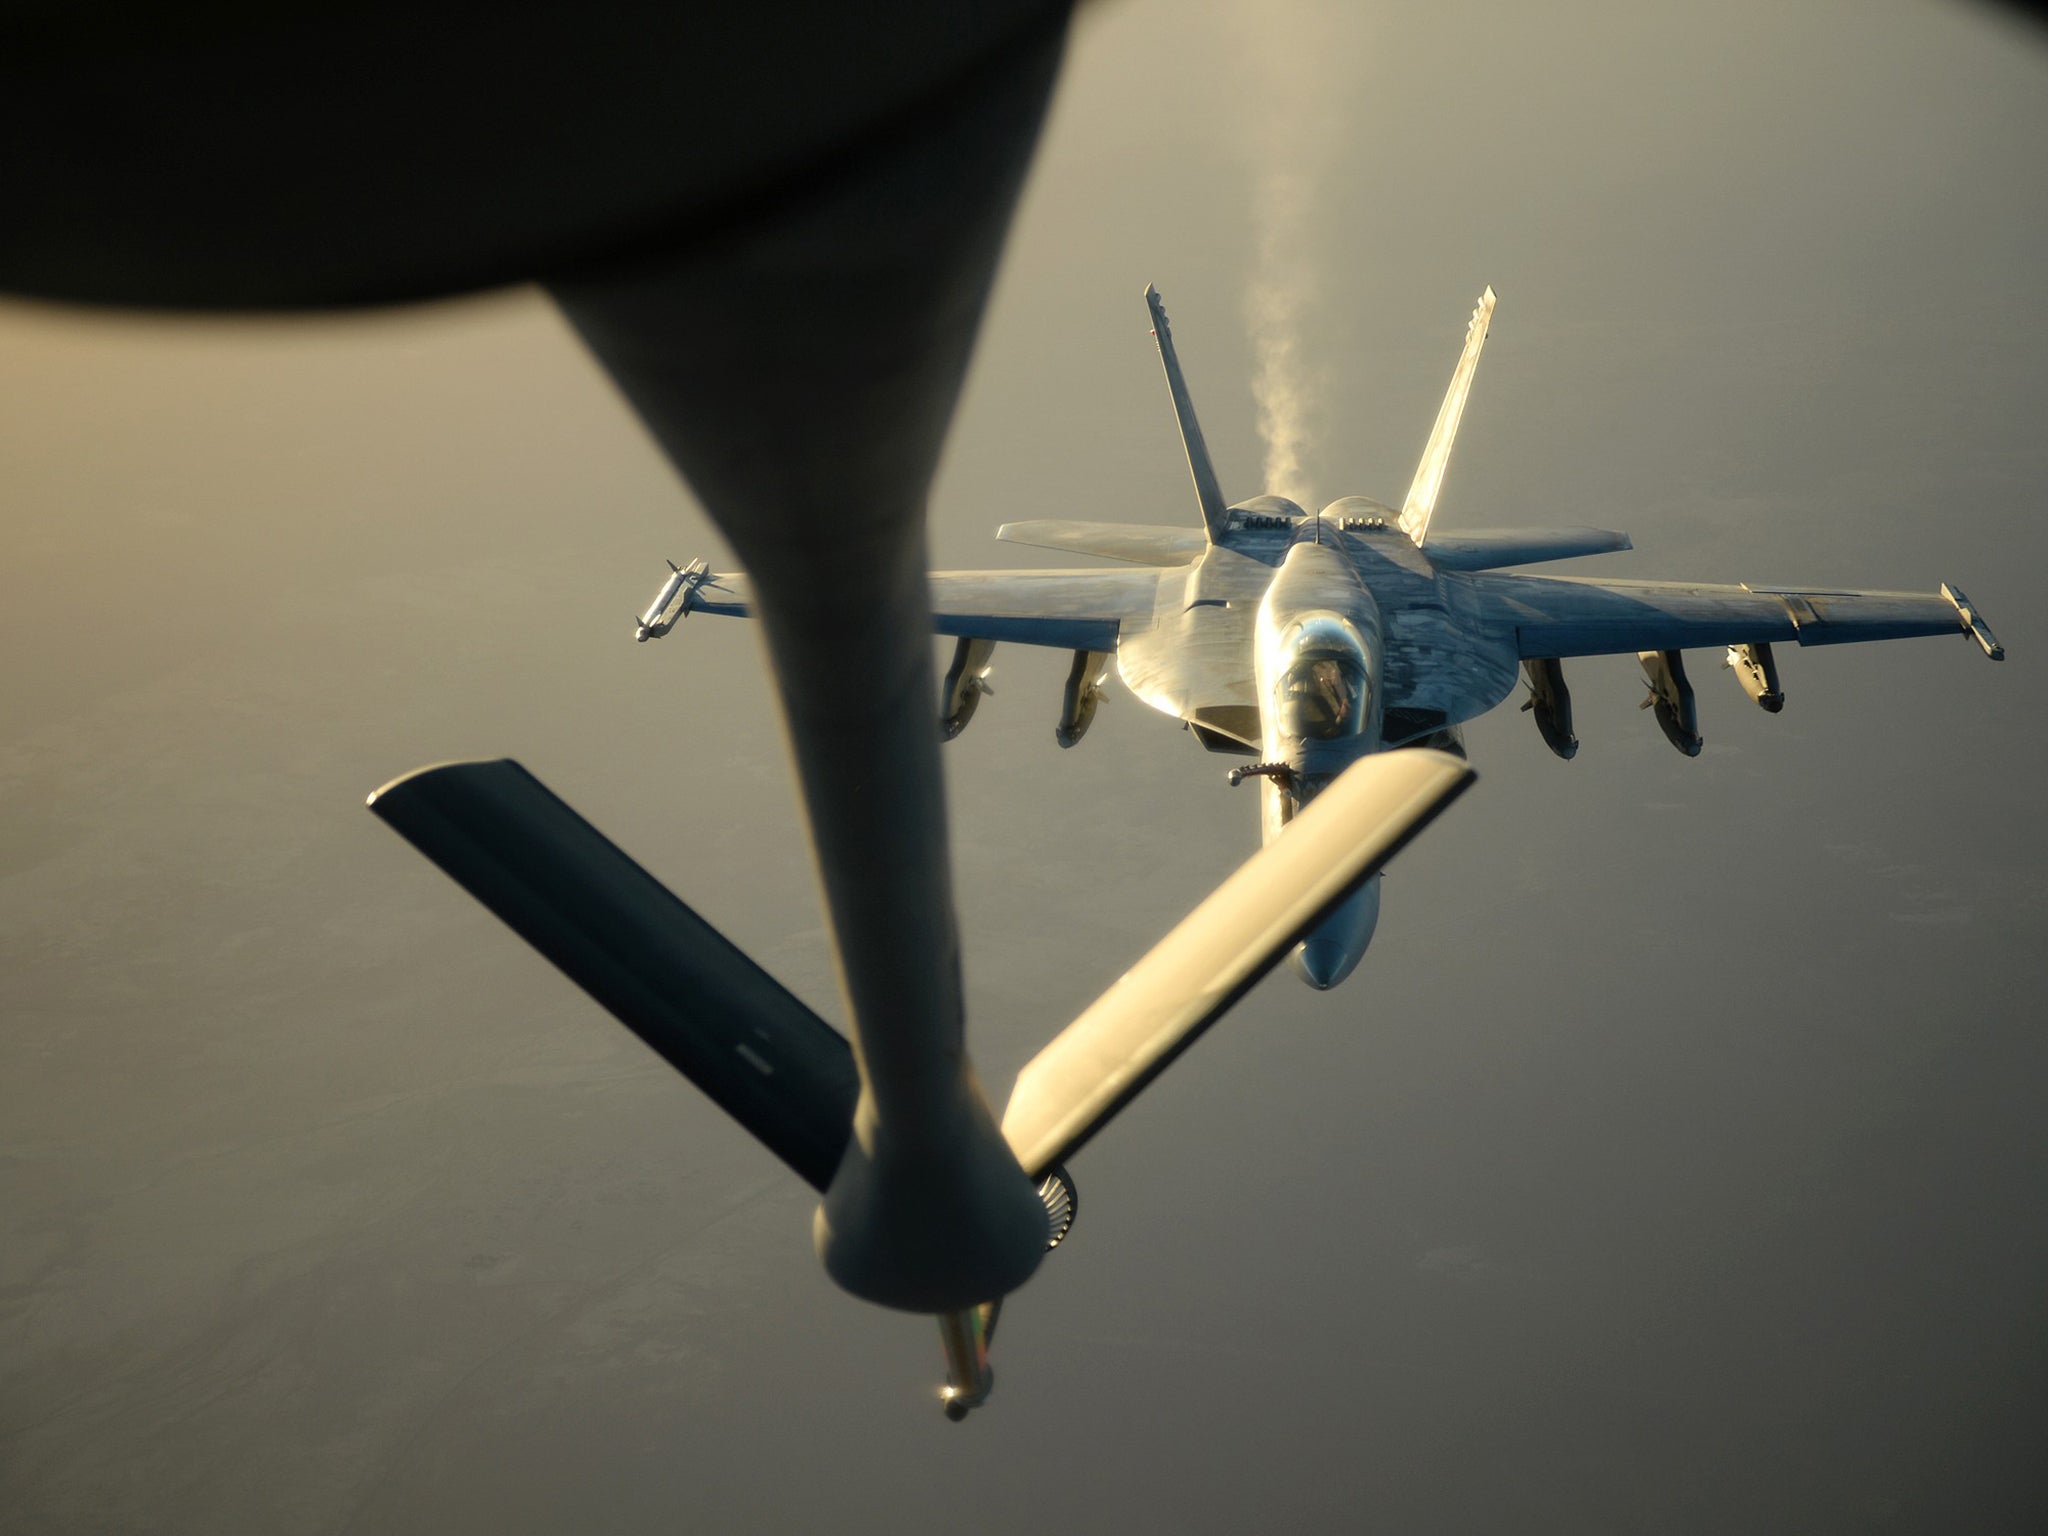 A US Navy jet refuels over northern Iraq